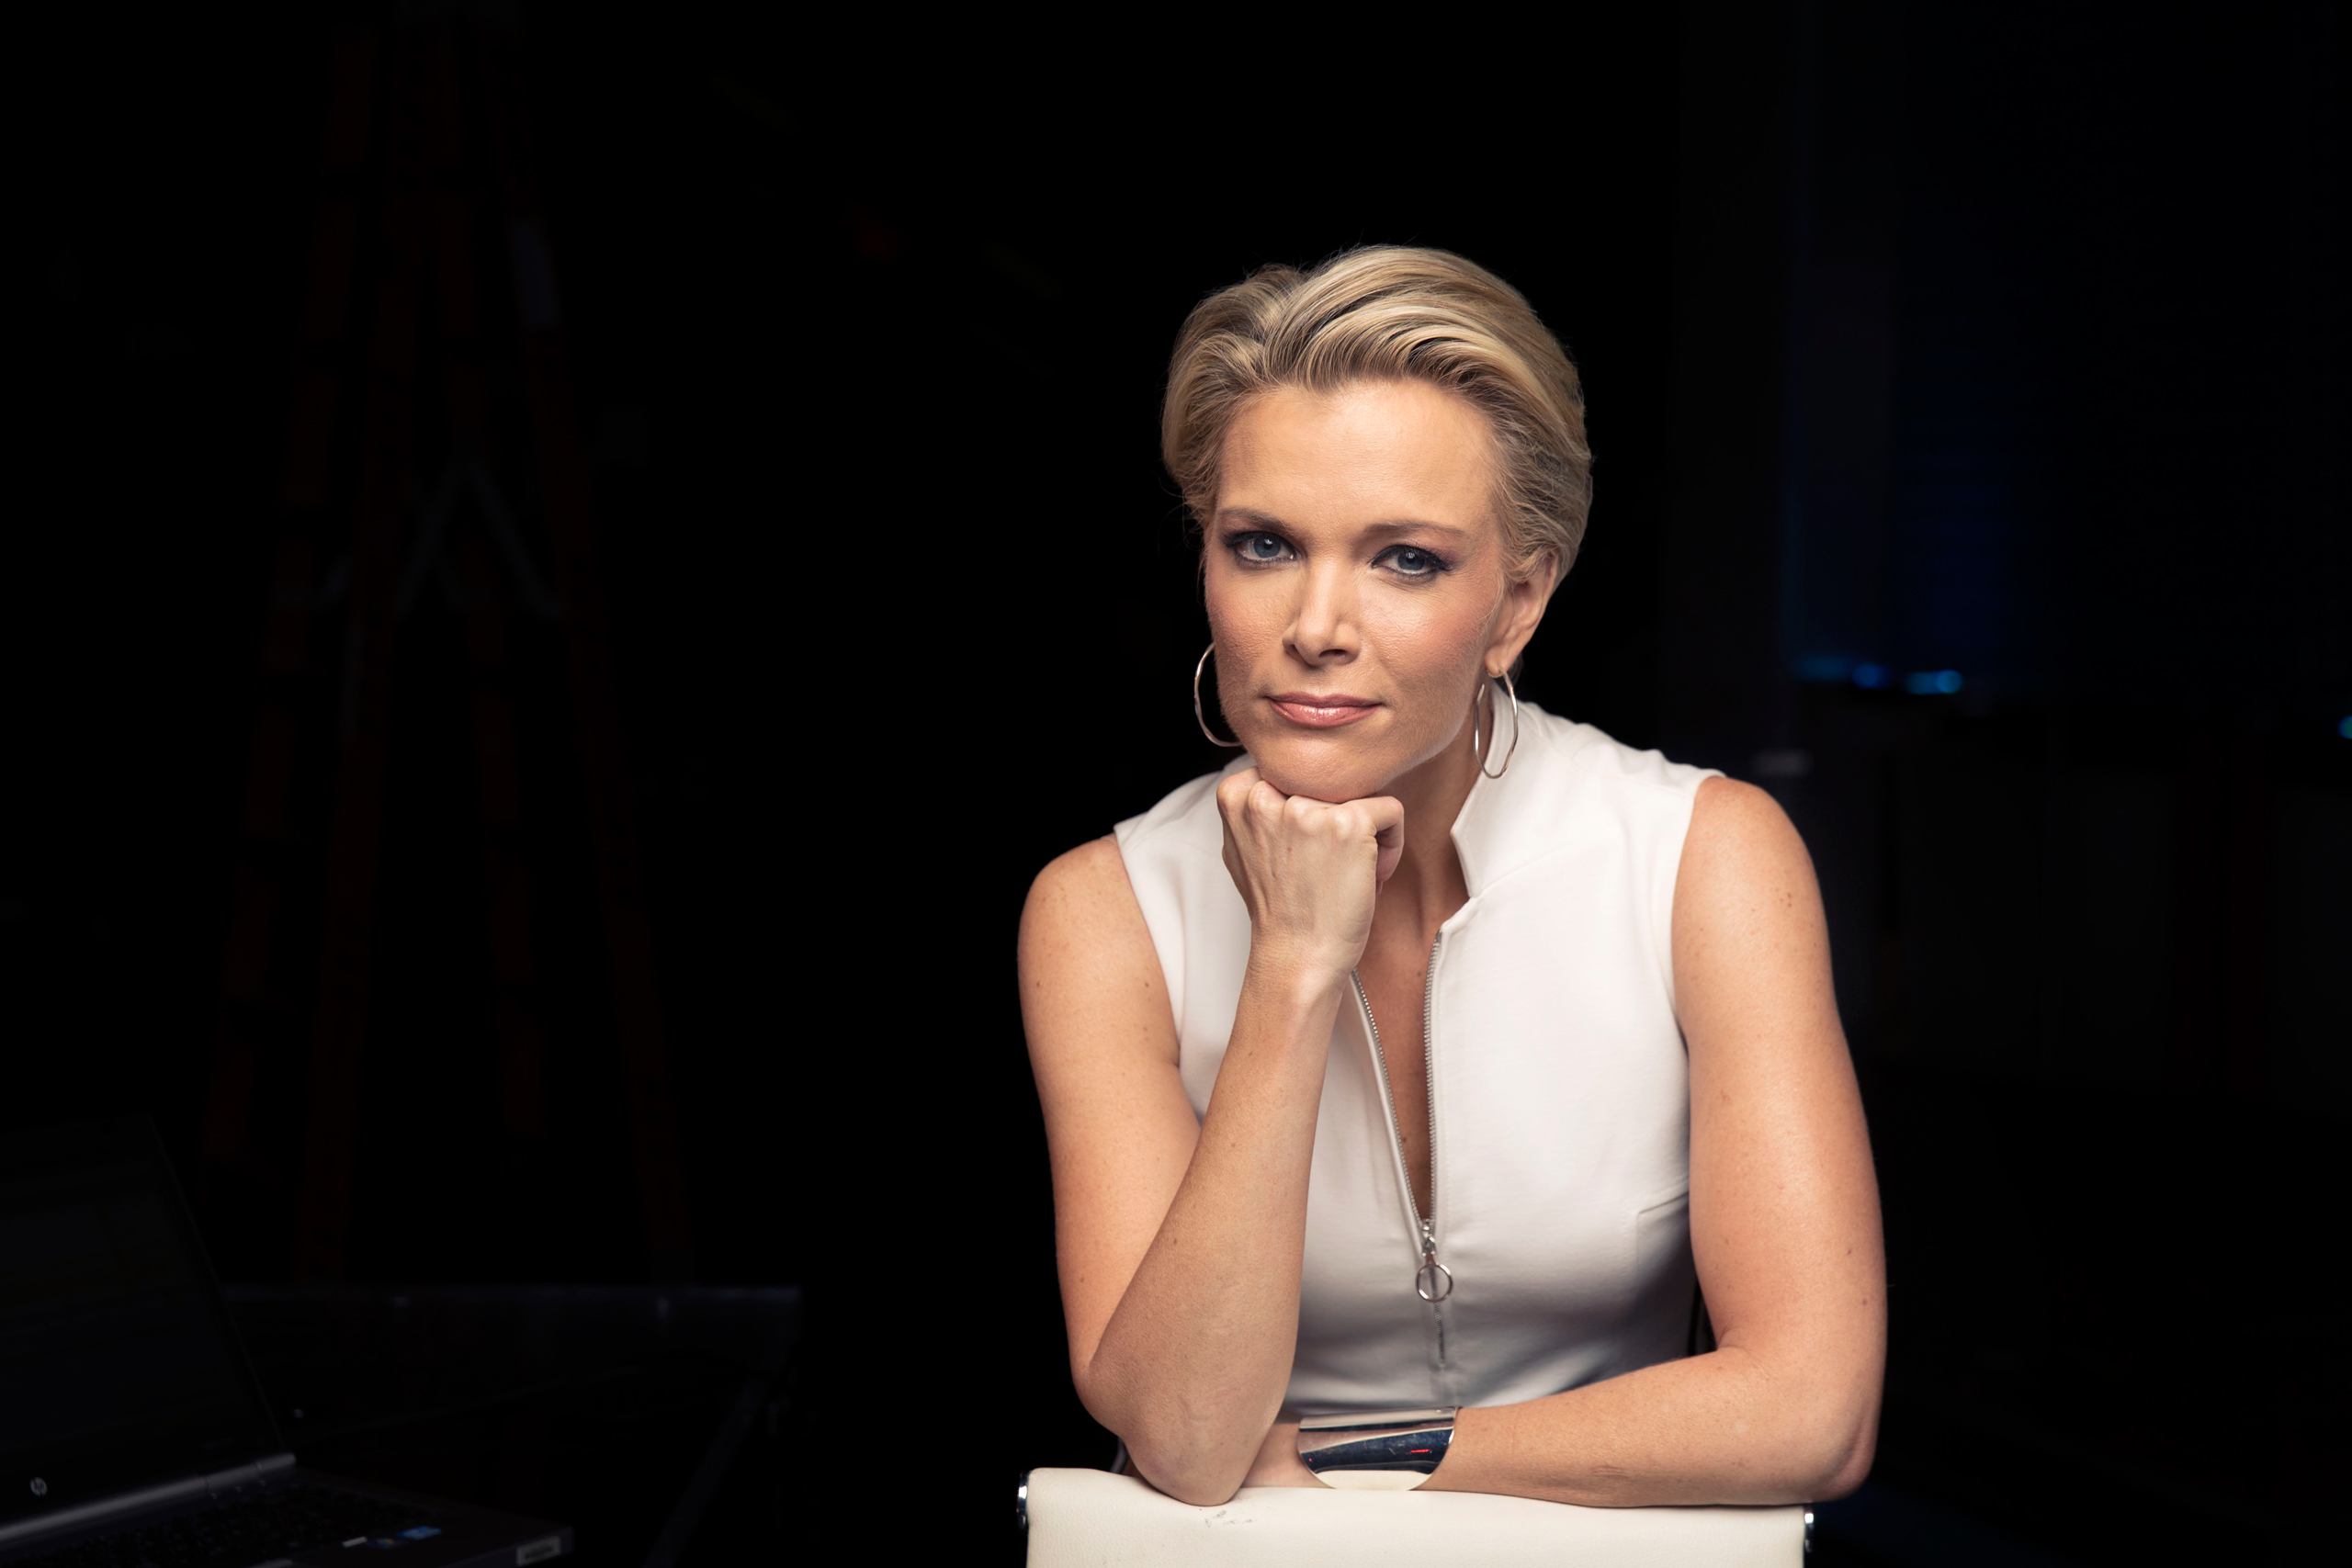 Megyn Kelly poses for a portrait in New York on May 5, 2016. (Victoria Will—Invision/AP)